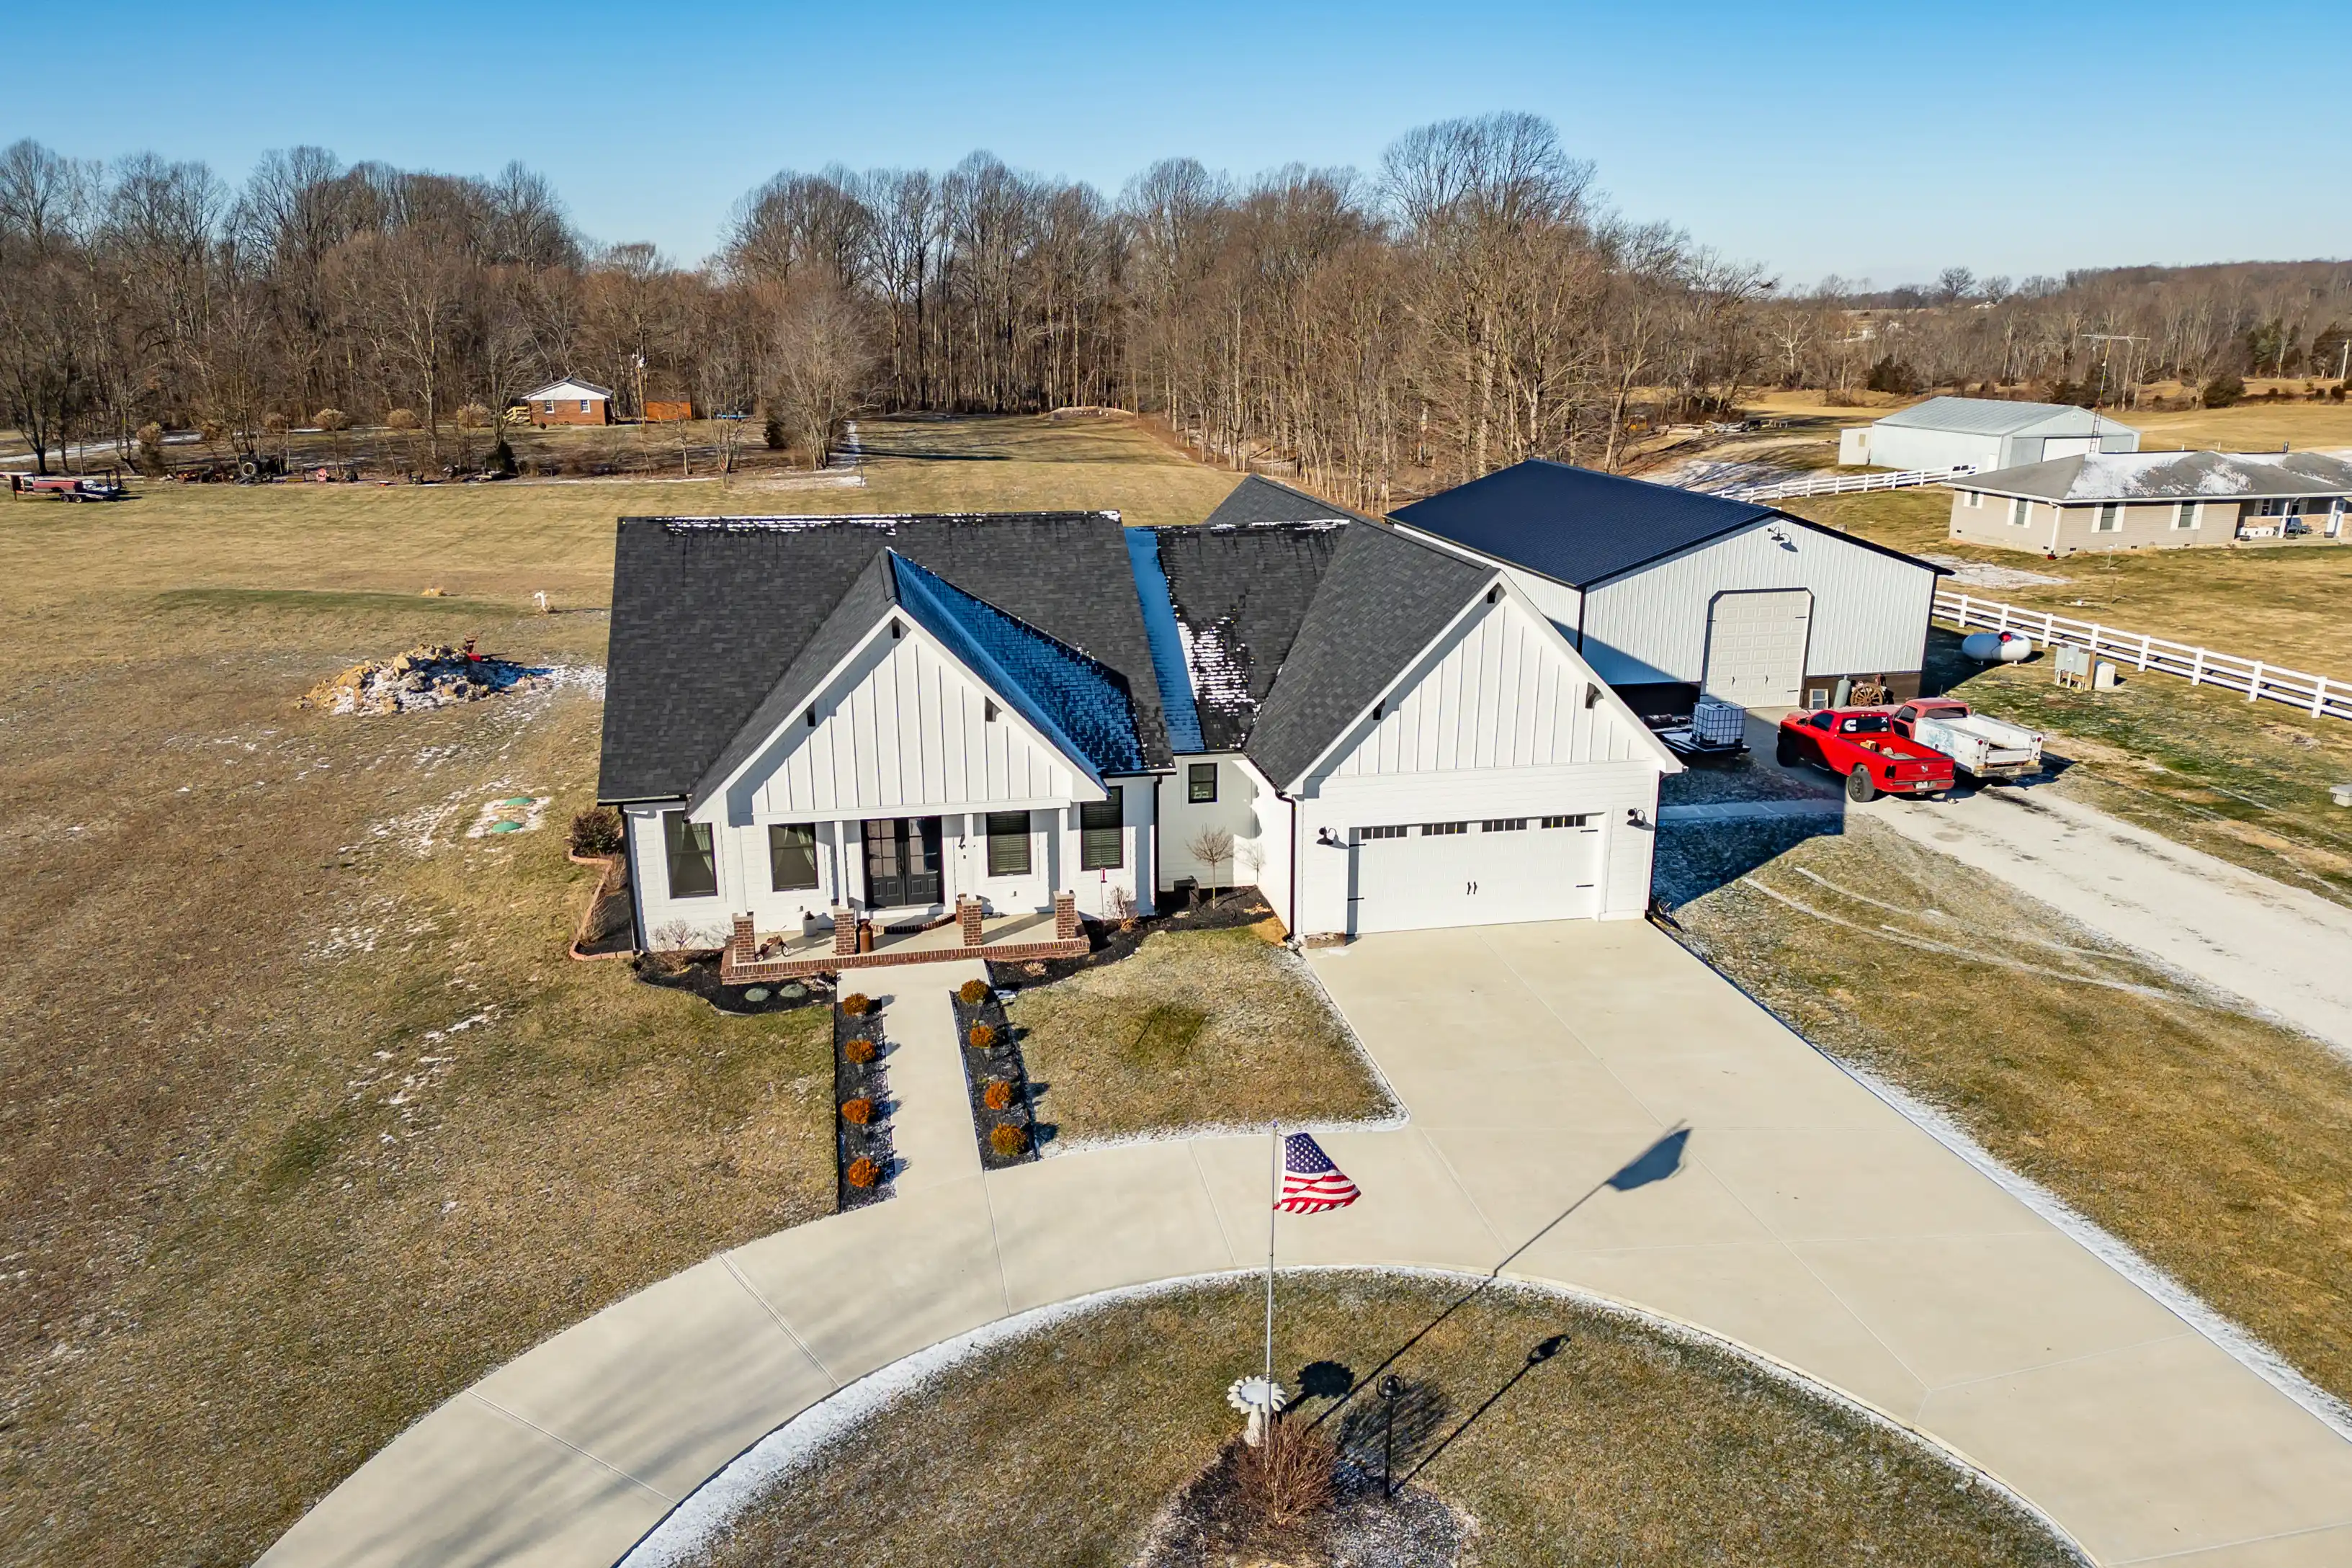 Aerial view of a modern farmhouse with white siding, black roof, and attached garage, next to a large metal outbuilding, with an American flag in the front yard and a red sports car parked nearby.